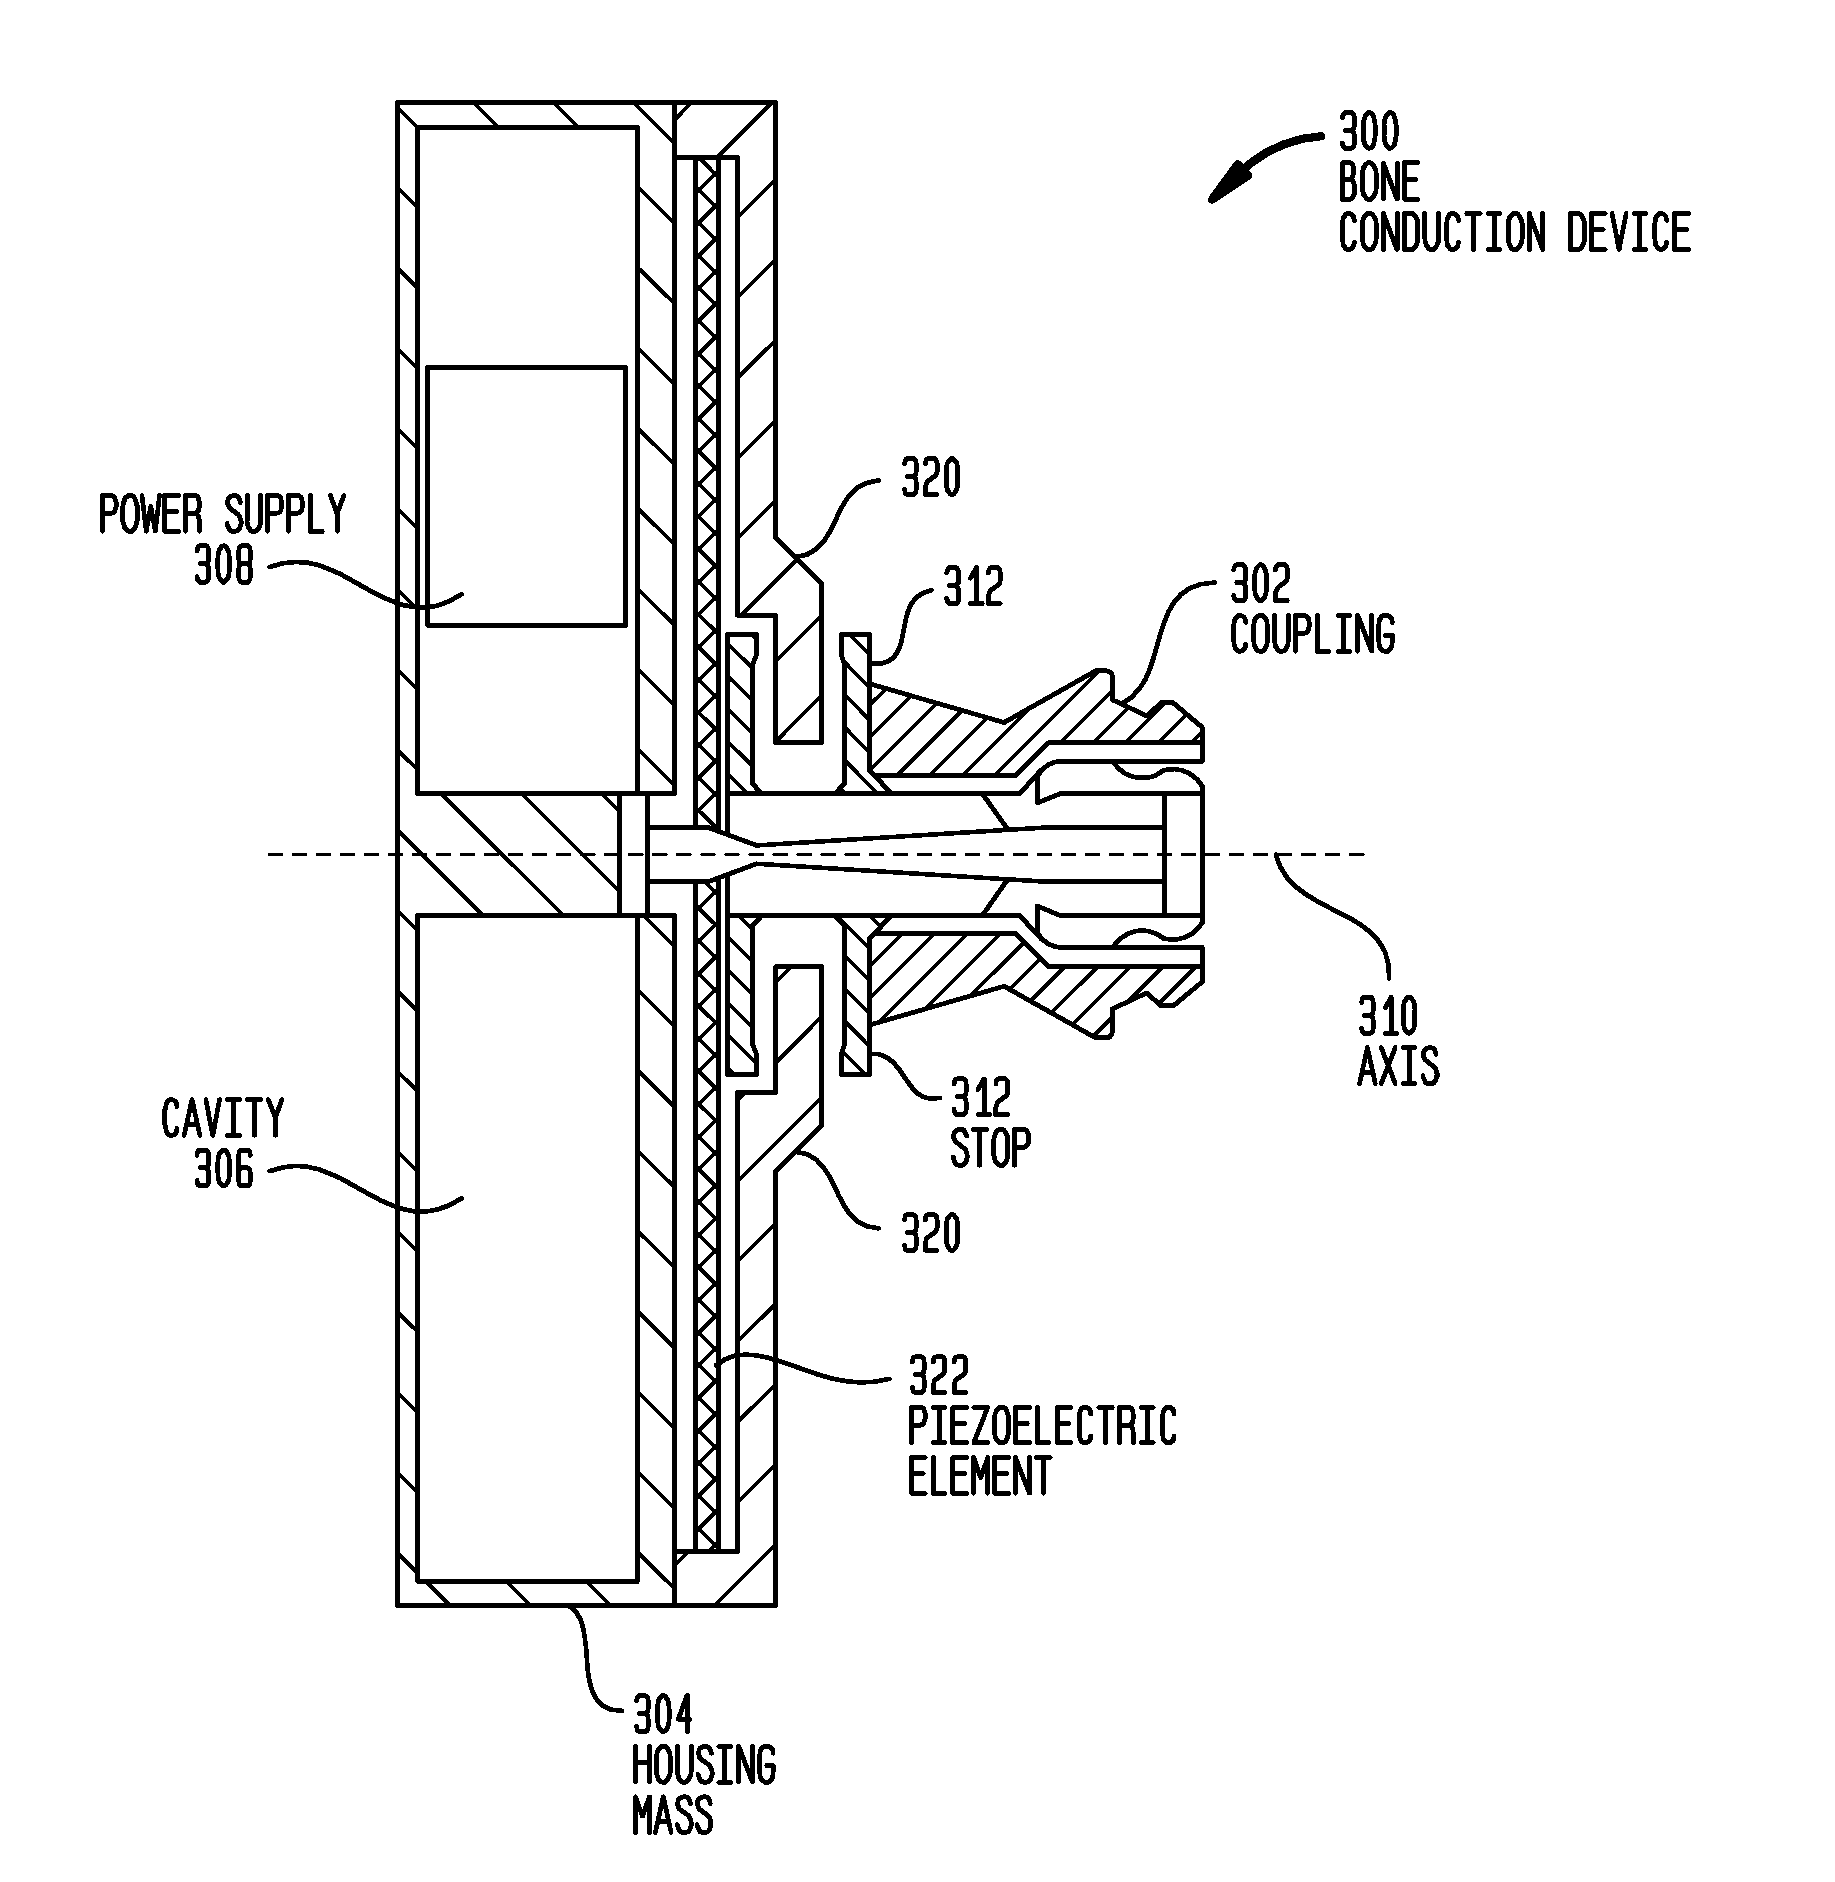  bone conduction device having an integrated housing and vibrator mass